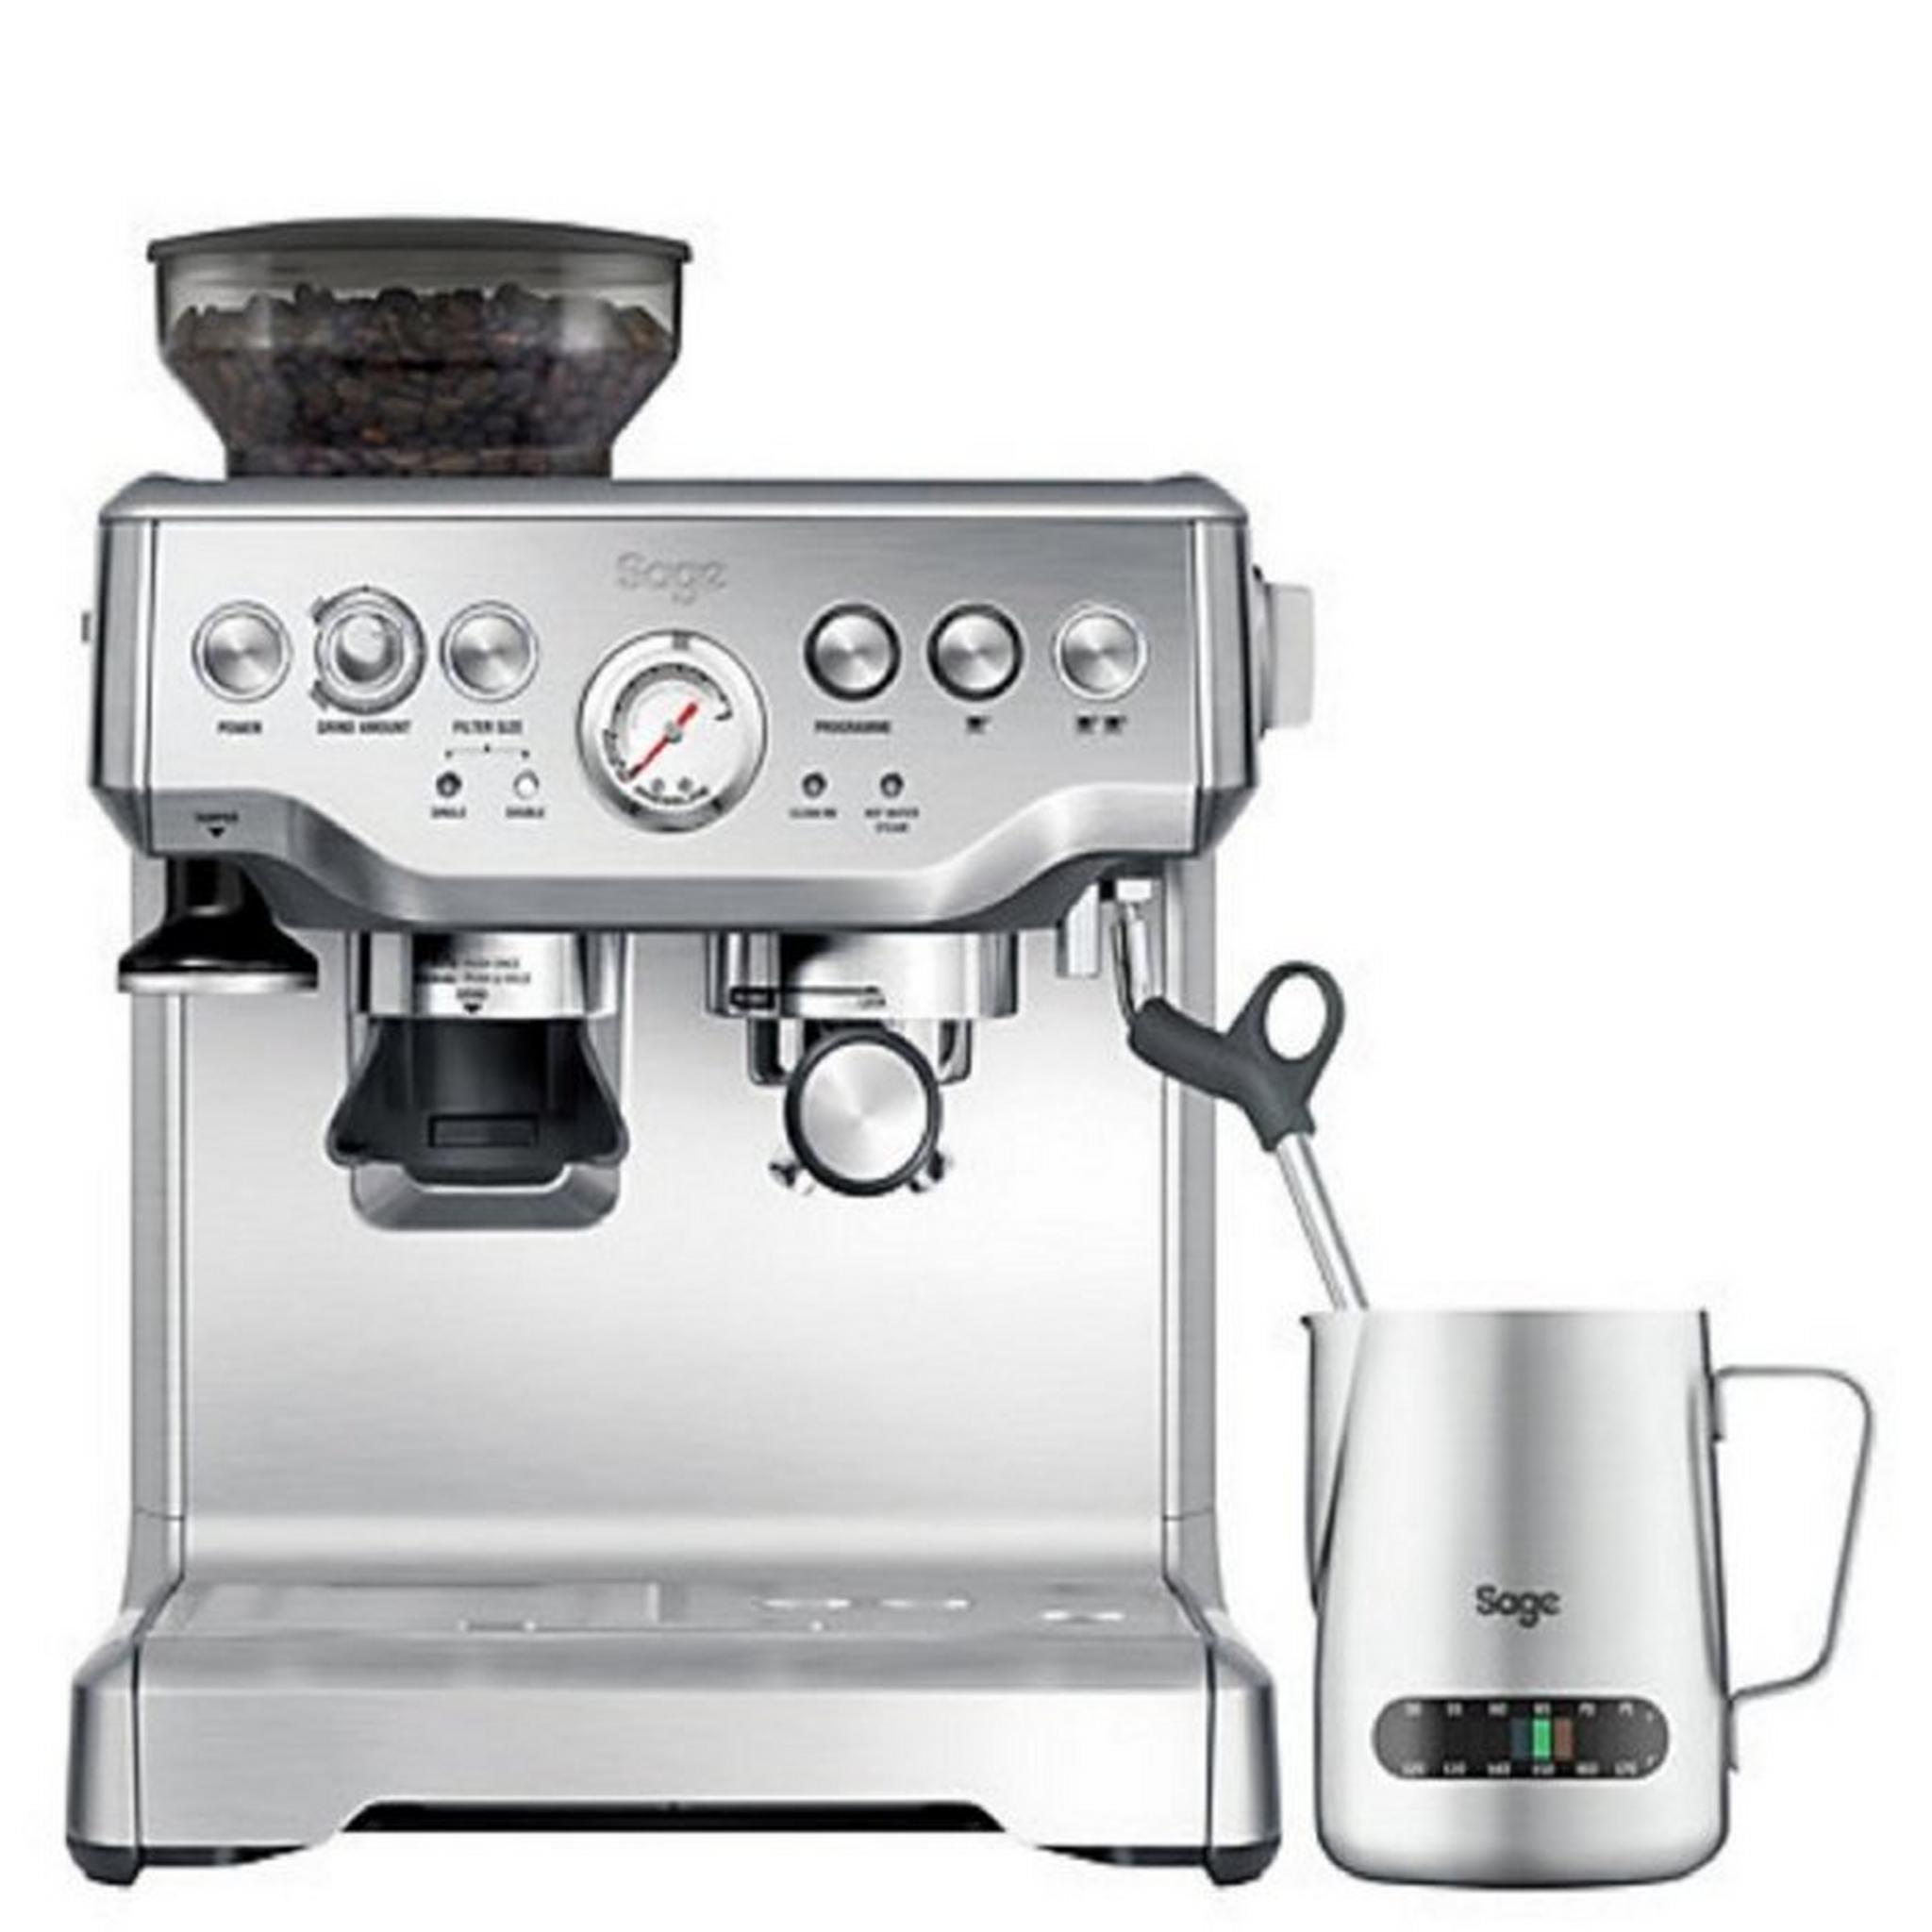 Sage Barista Express Coffee Maker, 1850W, 2L, SES875BSS - Stainless Steel